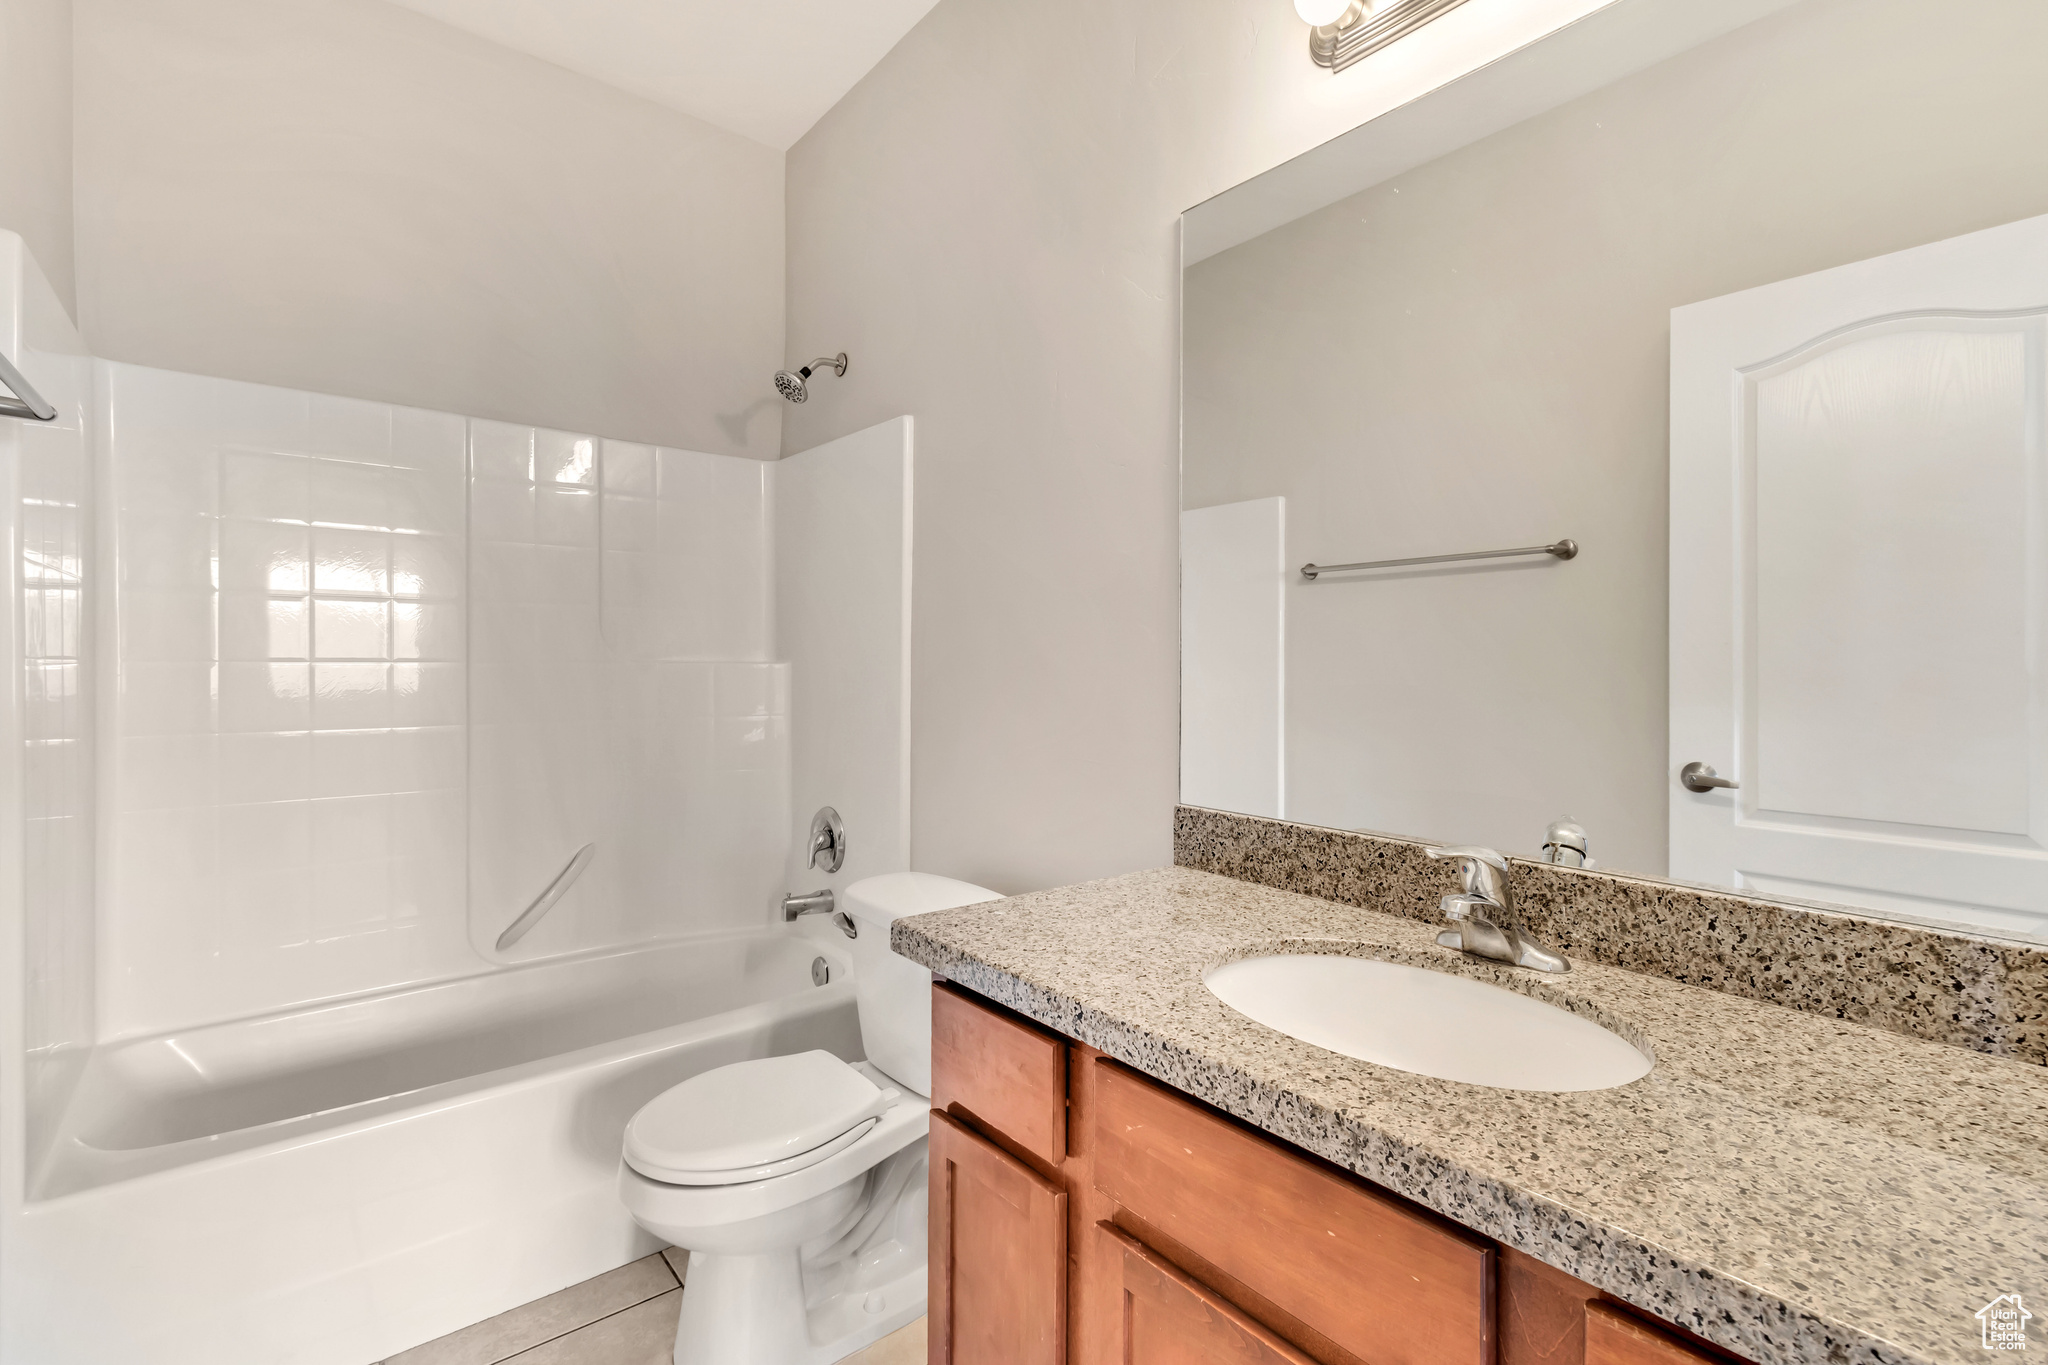 Full bathroom featuring shower / washtub combination, tile flooring, vanity with extensive cabinet space, and toilet